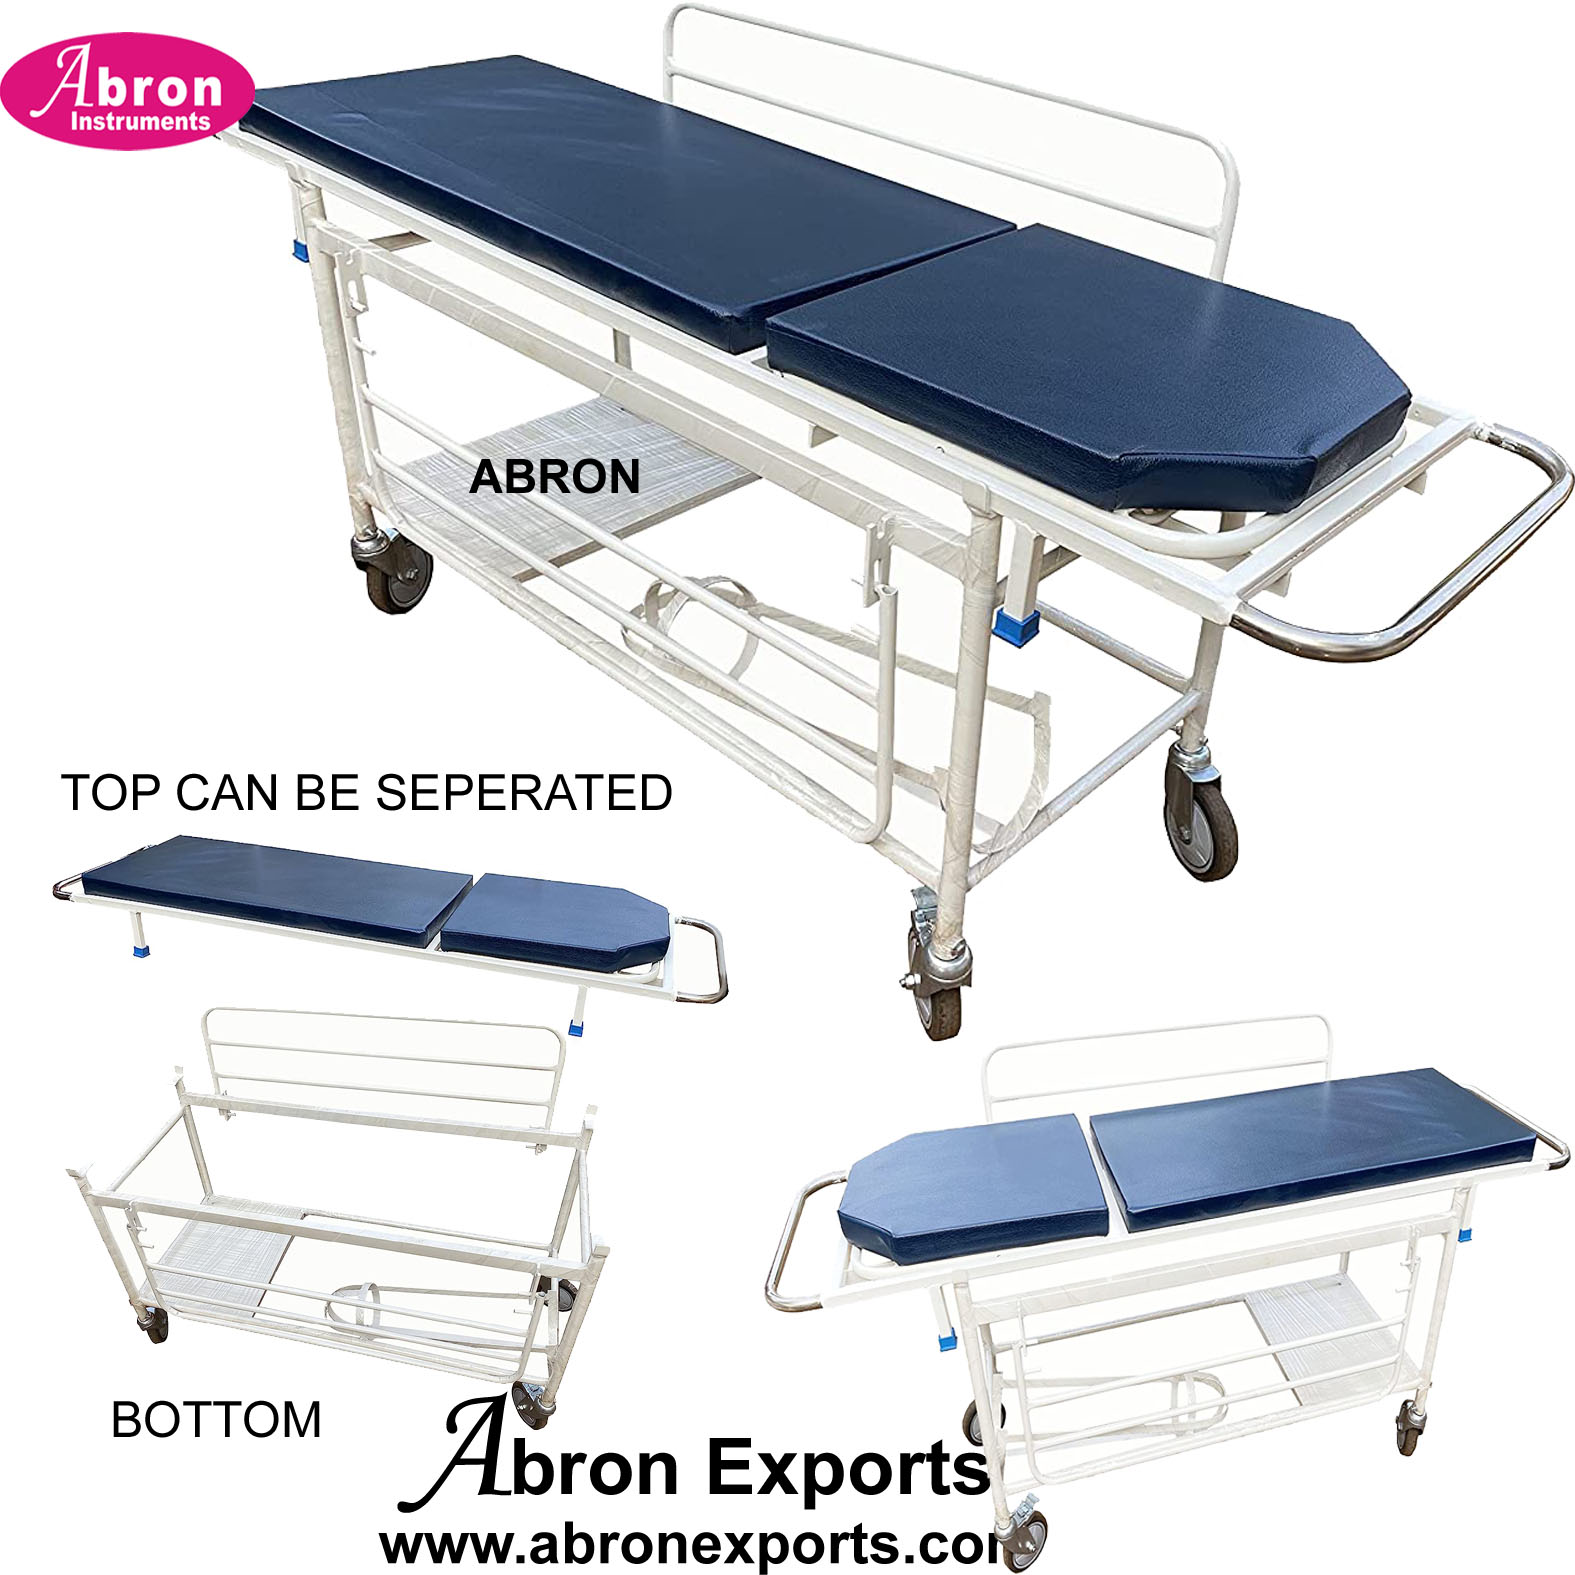 Stretcher Patient Trolley safety rail wheels steel emergency recovery oxygen O2 cylinder holder284x22x32in ABM-2261SPT2